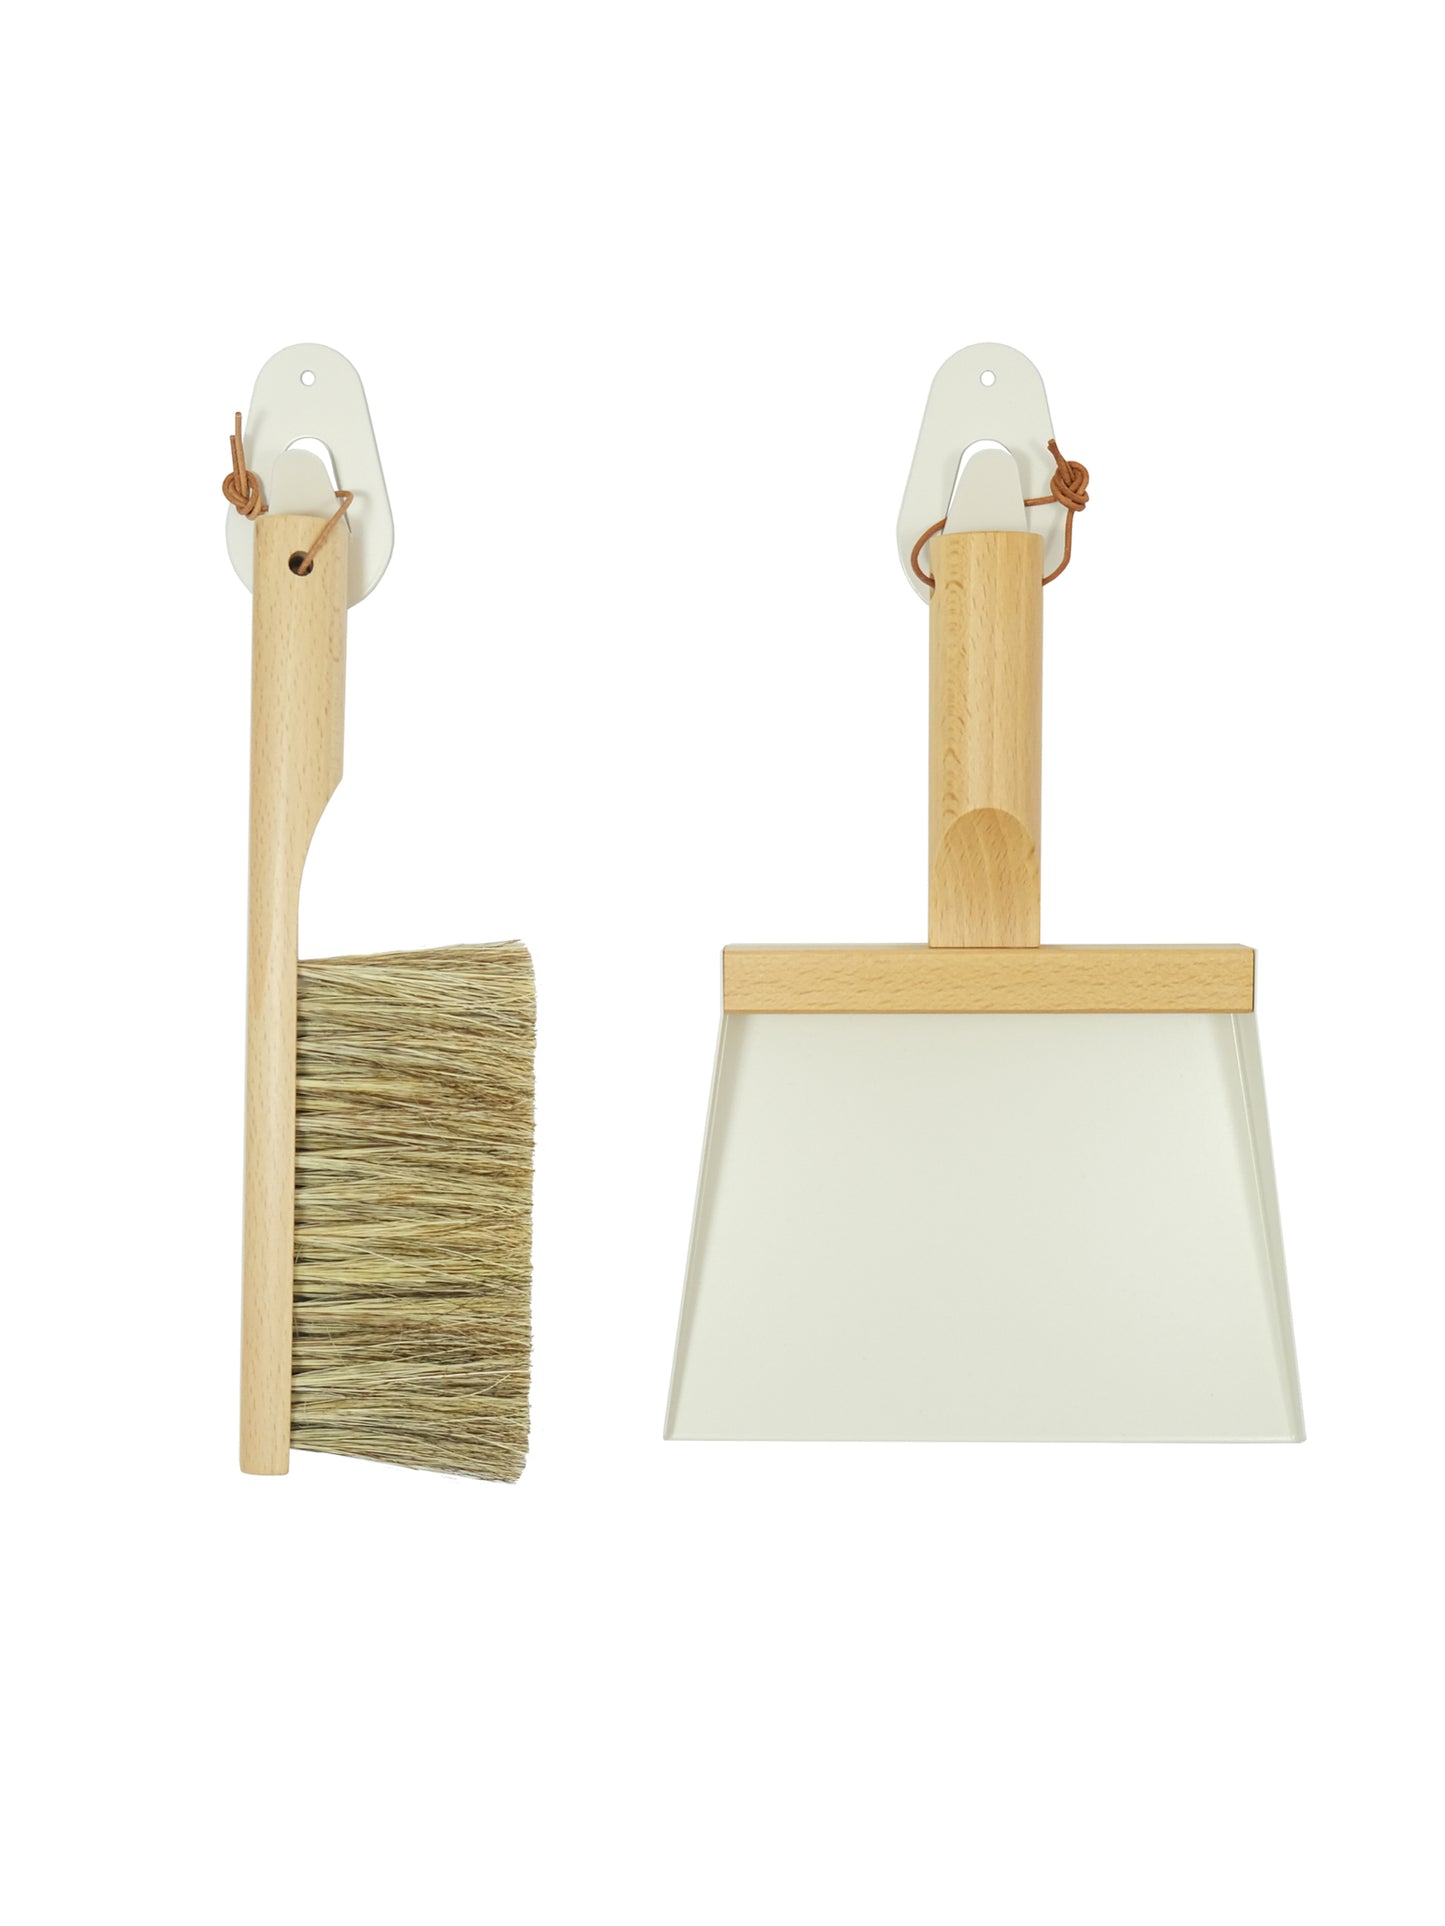 Andrée Jardin Mr. and Mrs. Clynk Hand Brush, Dustpan and  Wall Hook Set White Weston Table